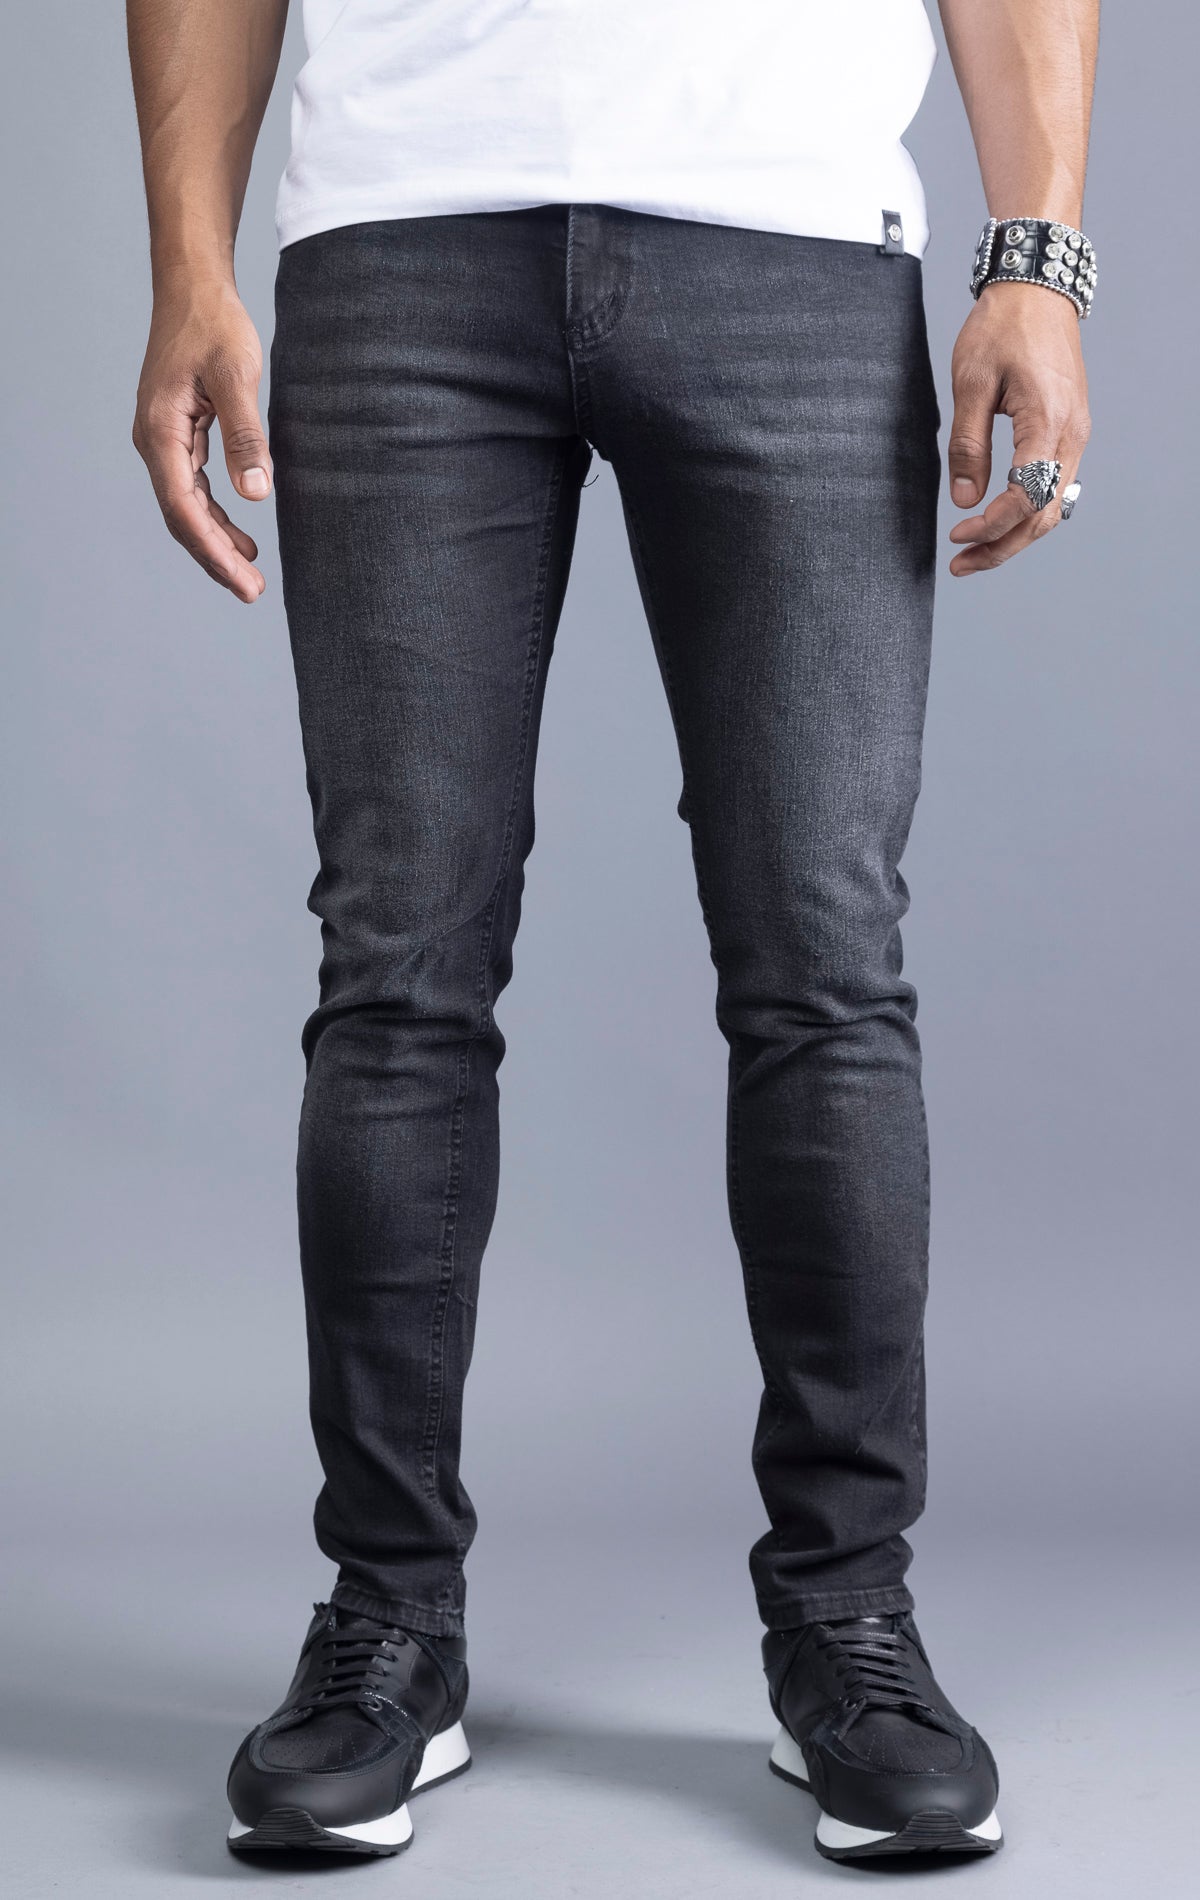 Men's slim fit stretch jeans in denim for a stylish and comfortable look.